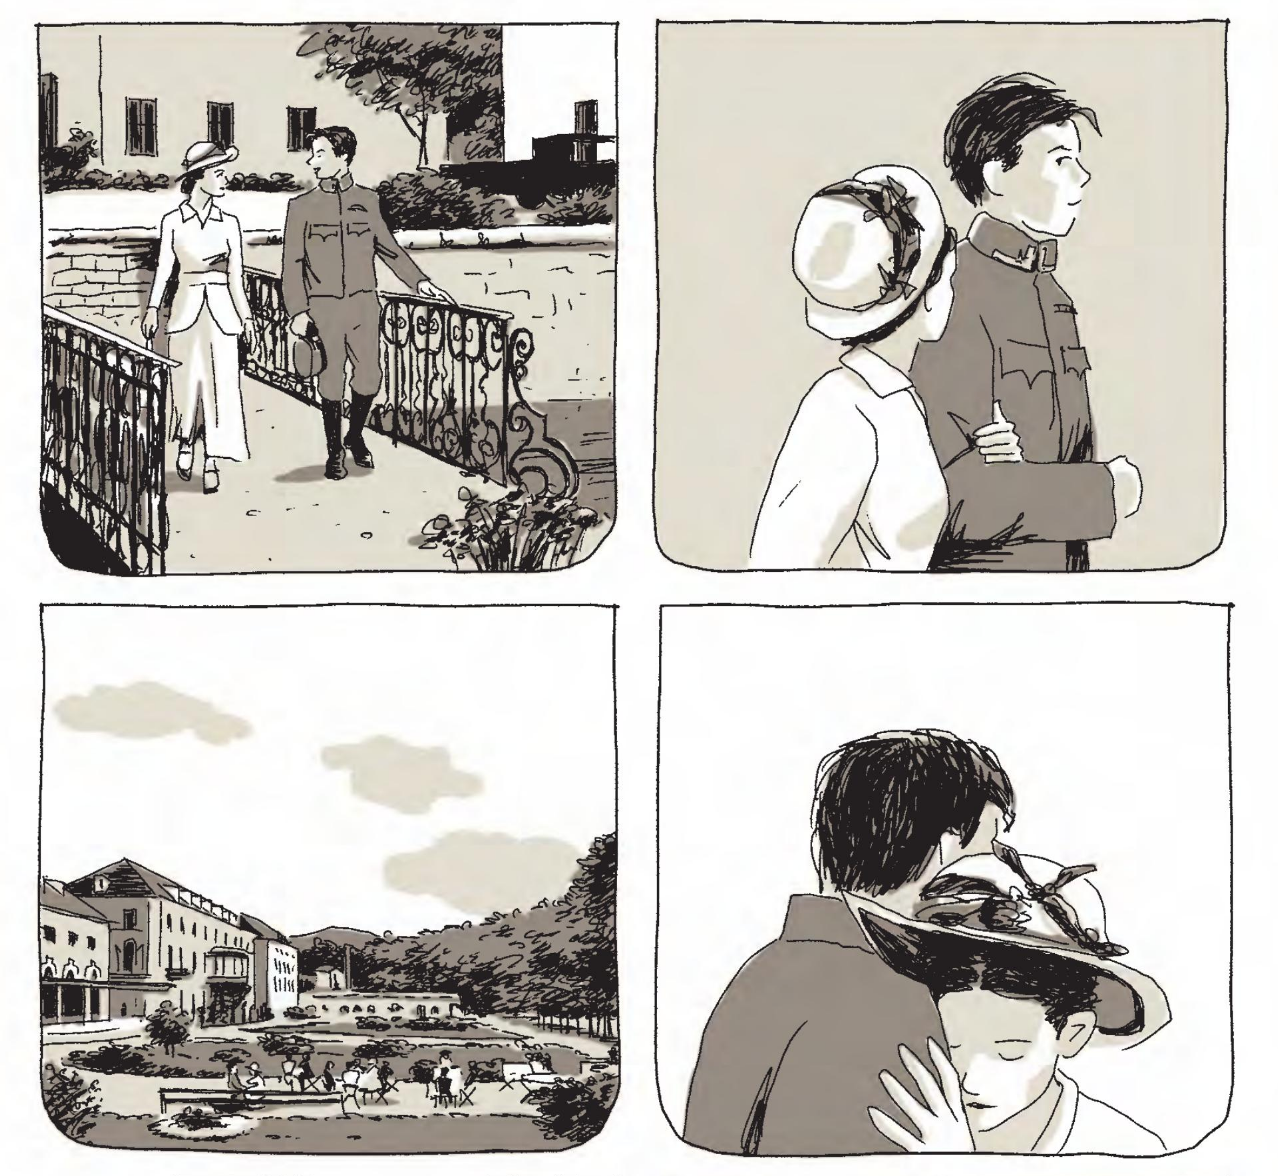 A series of wordless panels showing a young man in a military uniform walking with a young woman. At last they sadly embrace.